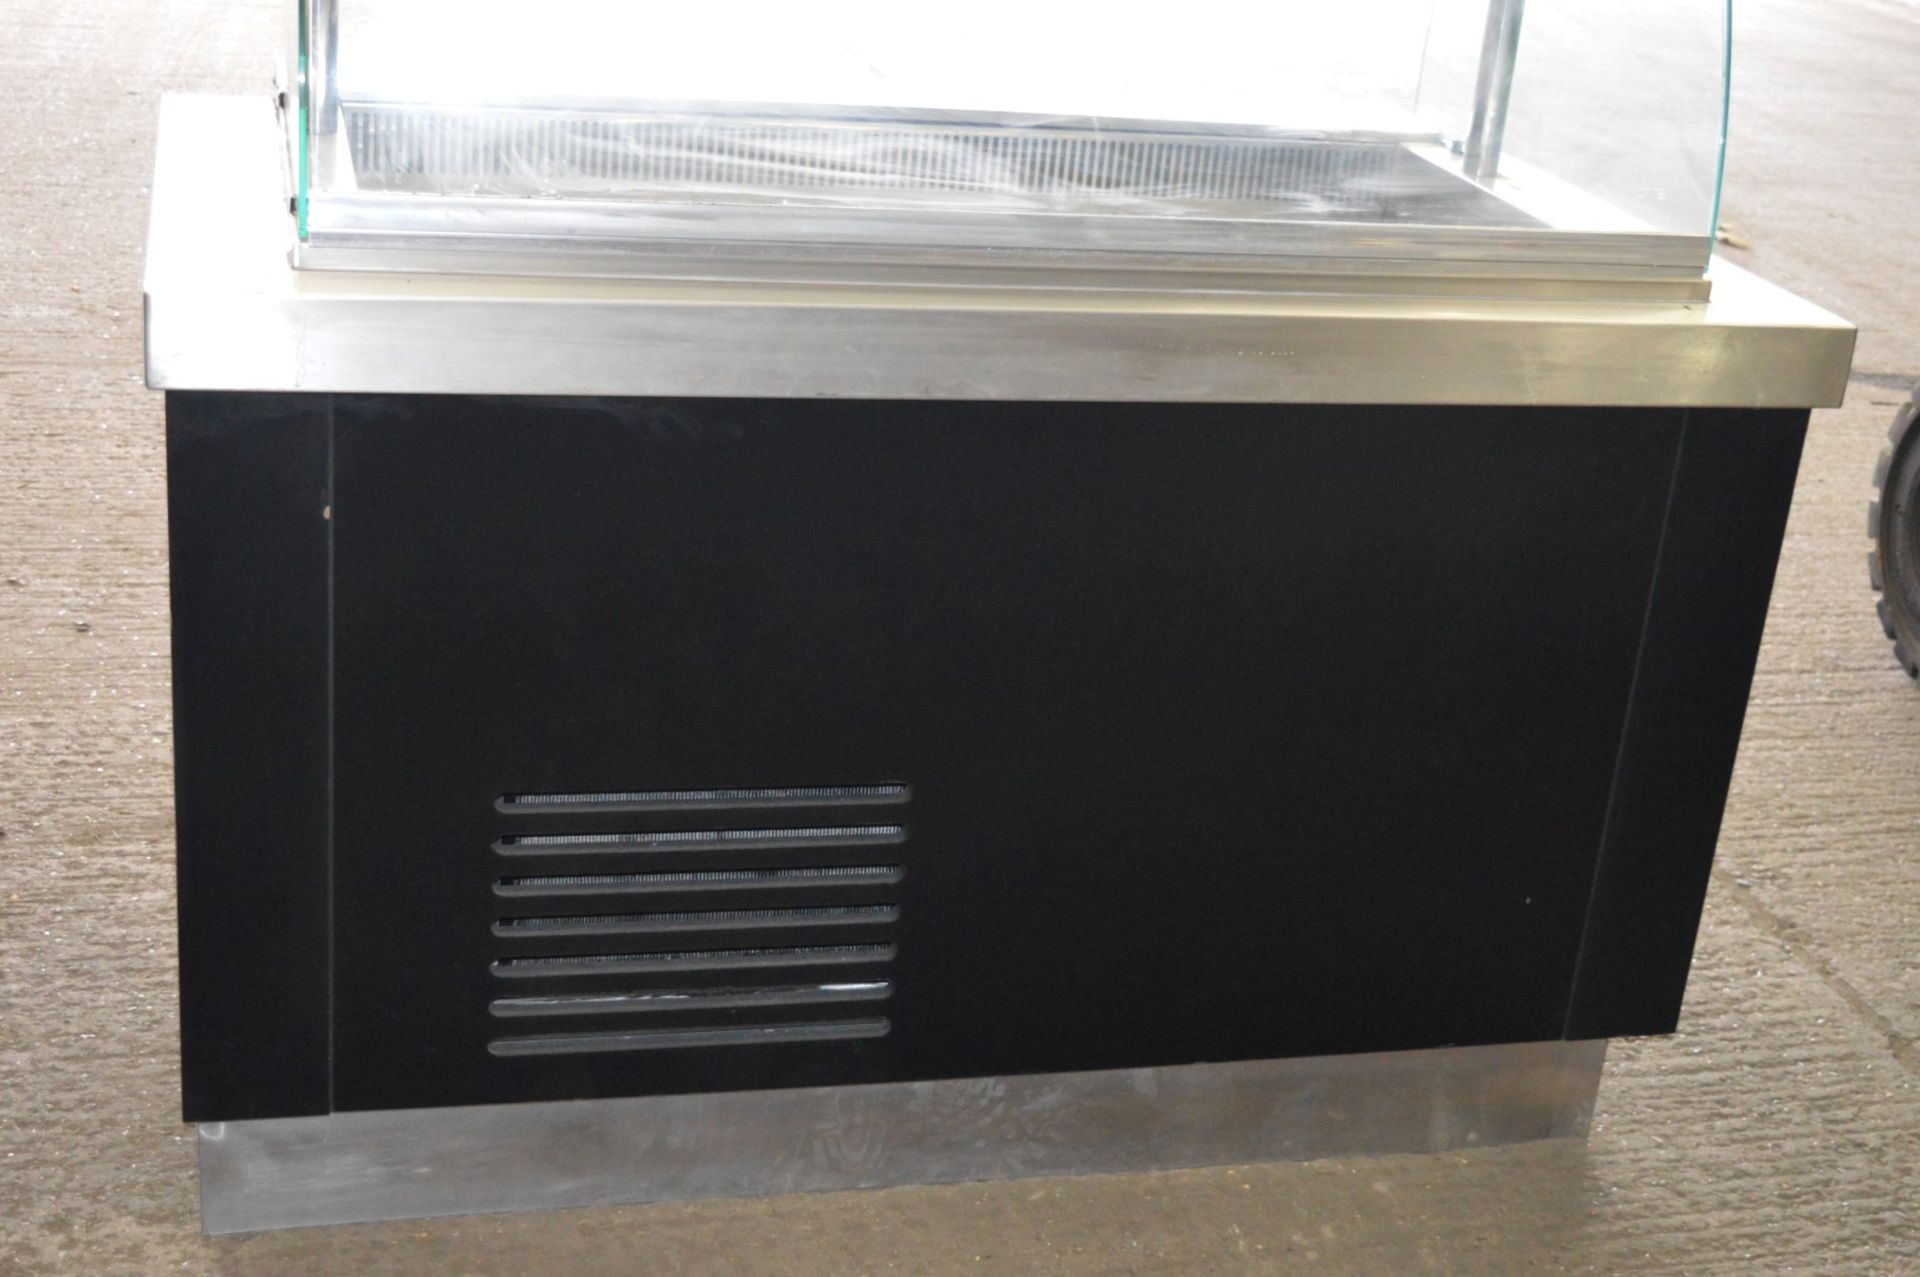 1 x Heated Deli Serving Counter - Ideal For Pub Carvery, Canteens, All You Can Eat Restaurants, - Image 3 of 9